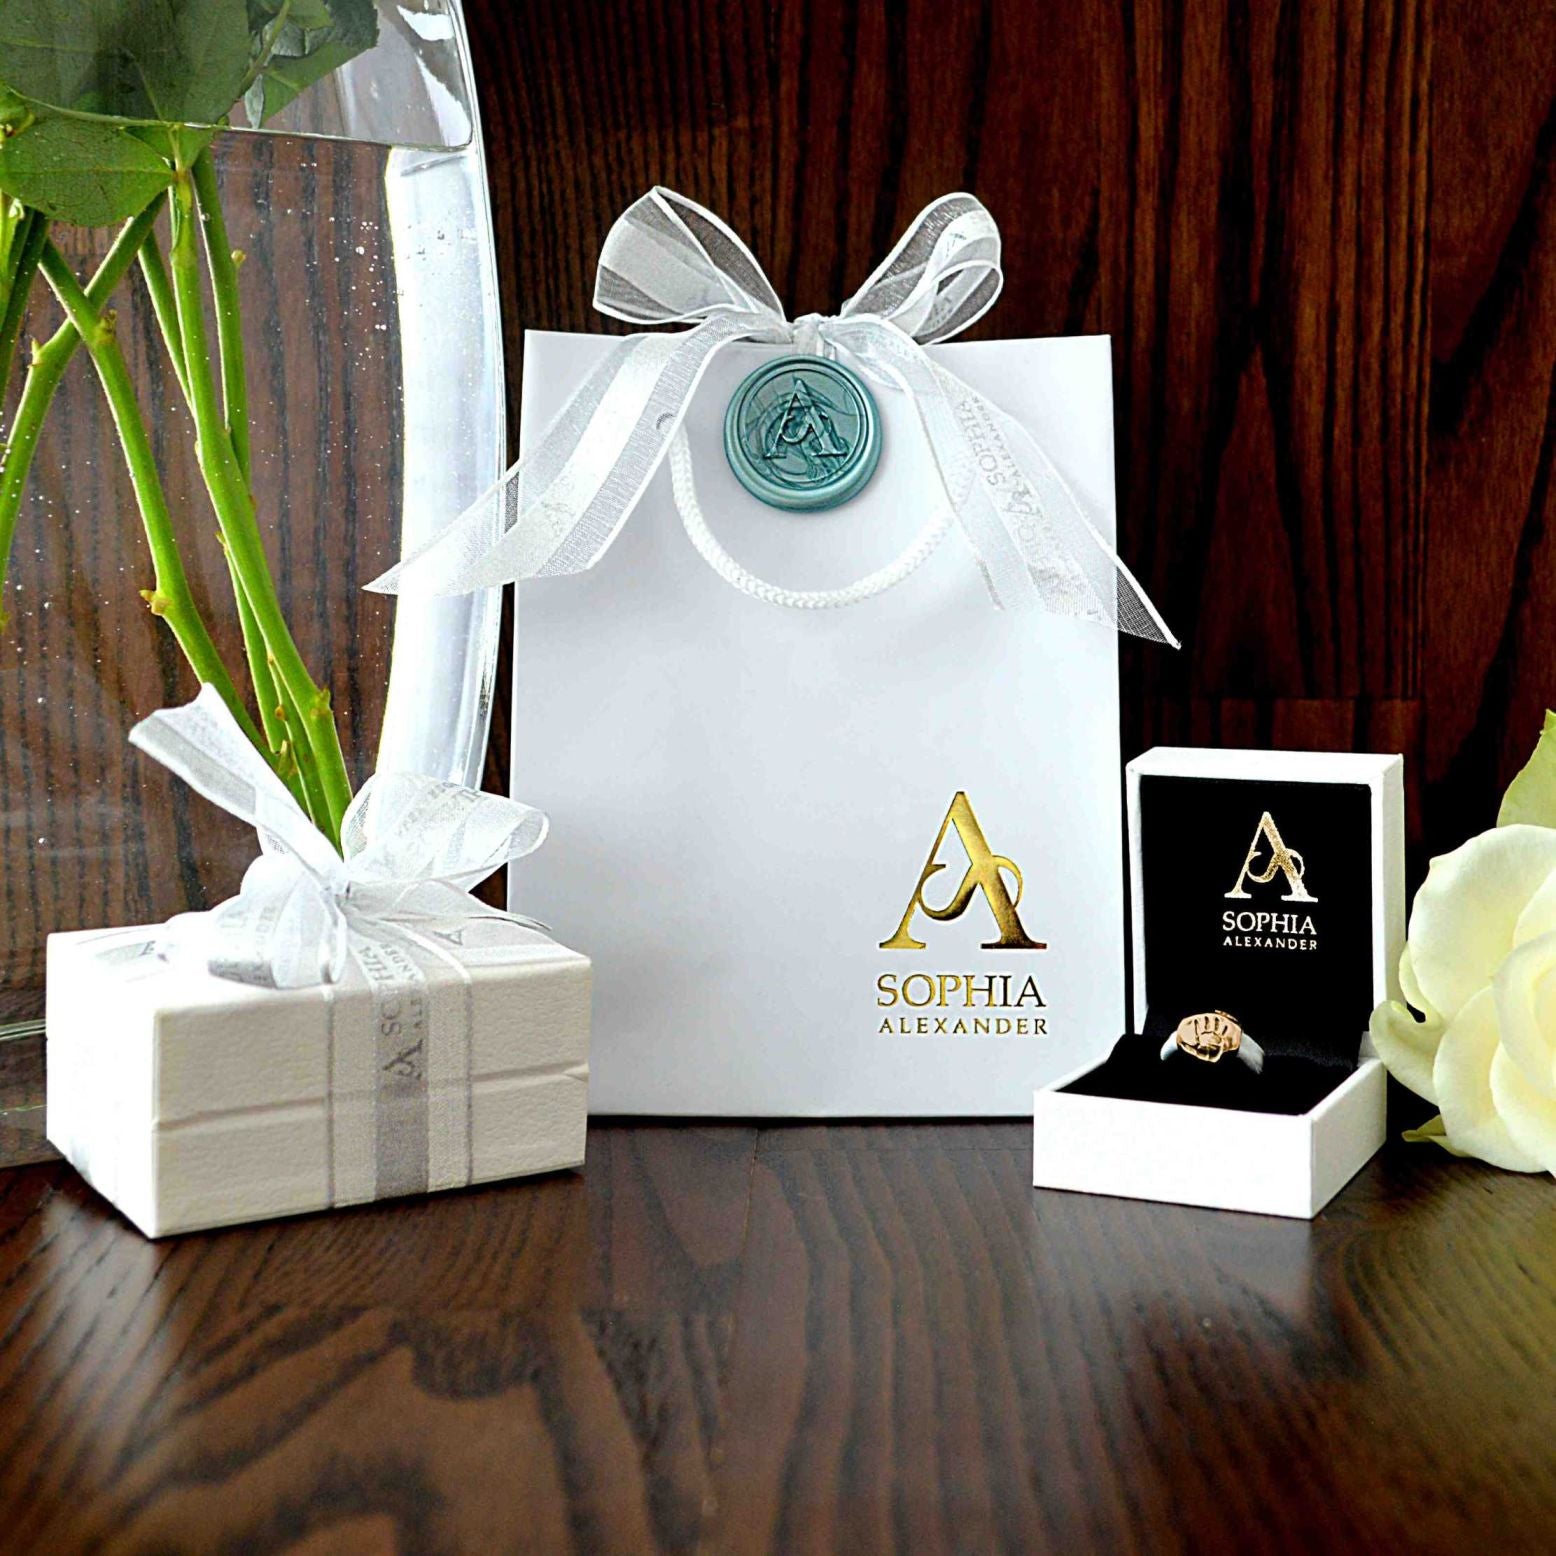 A Sophia Alexander Jewellery gift and two jewellery boxes sit on a dark wooden background.  A white rose is to the right side and a glass vase with rose stems is to the left side.  The bag and boxes are white with ribbons and a wax seal.  One jewellery box is open showing a gold charm bead that features a baby handprint.